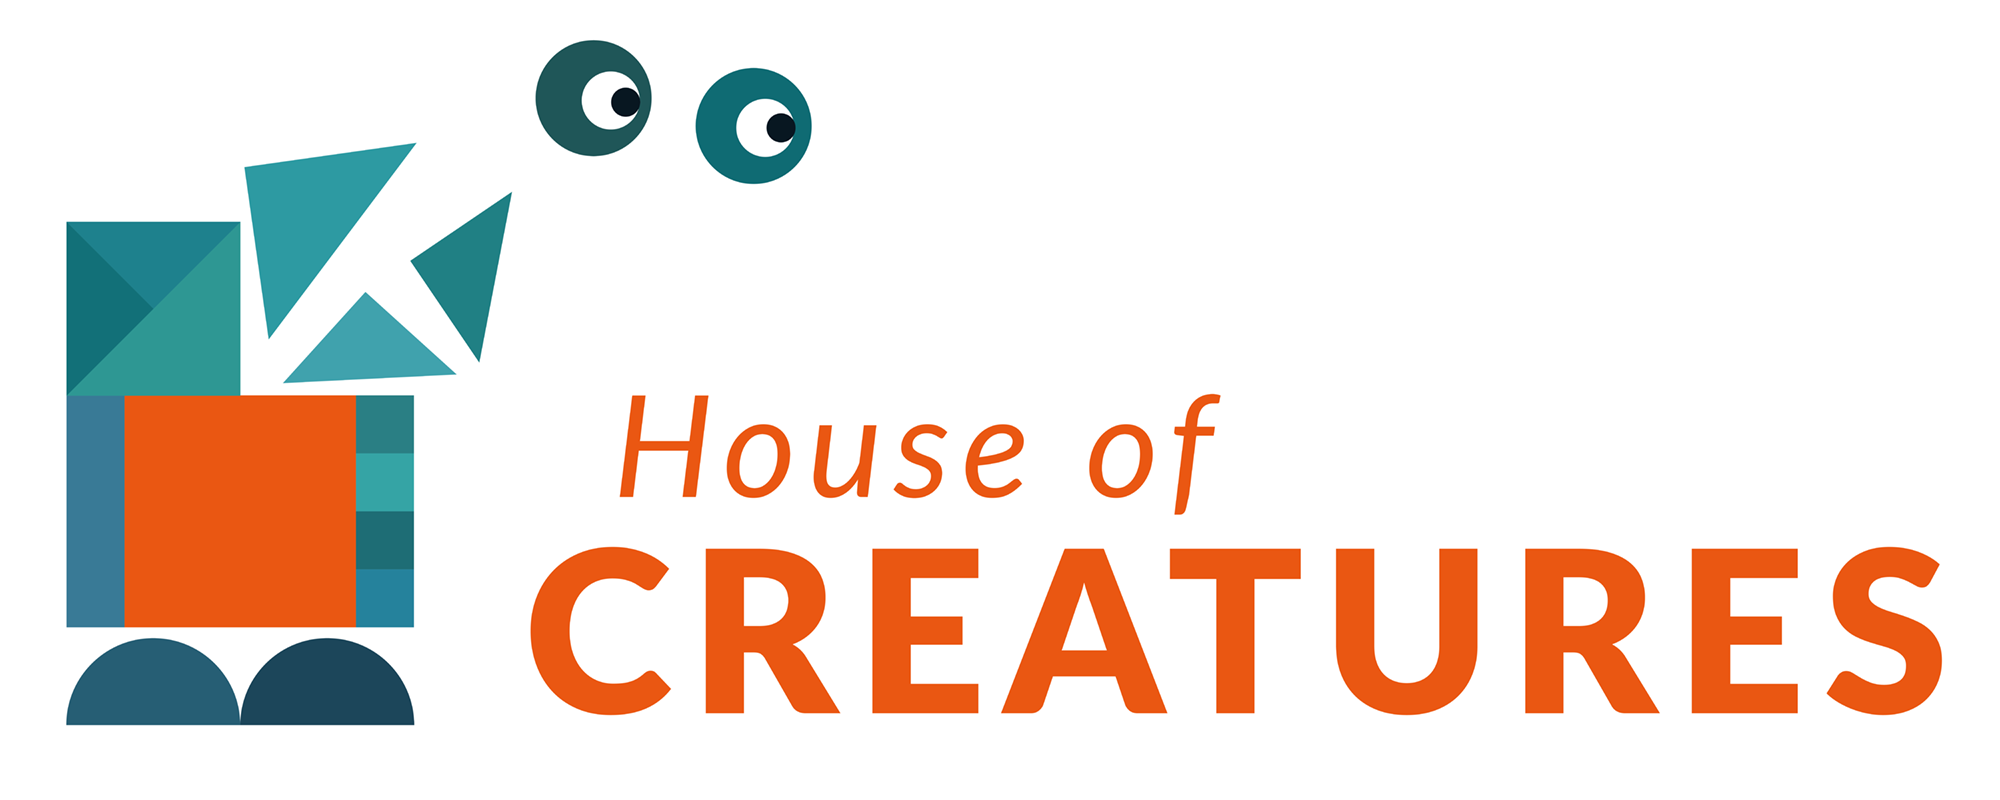 House of Creatures - Logo